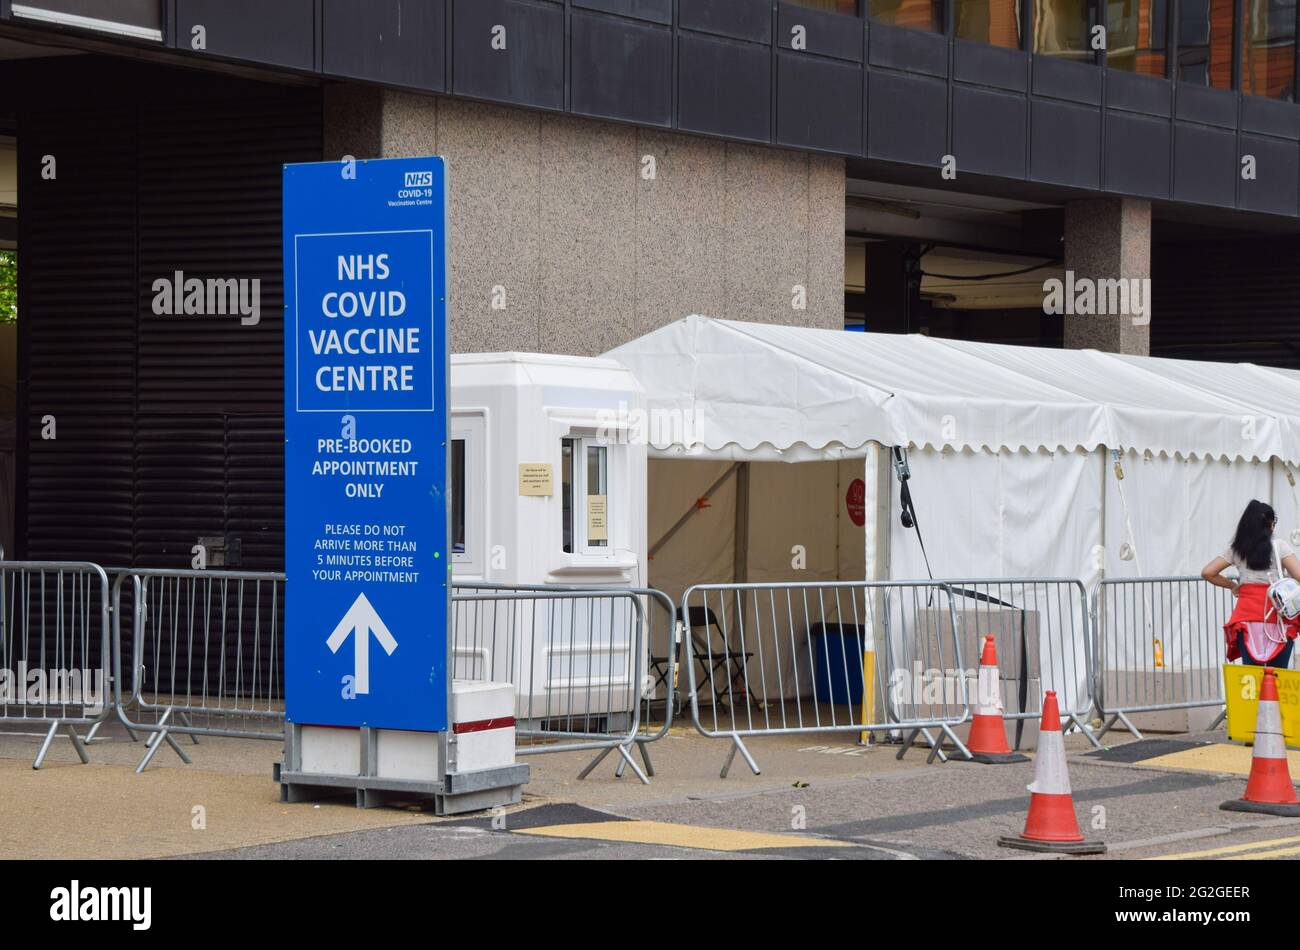 London, United Kingdom. 11th June 2021. NHS COVID Vaccine Centre in Wembley. Over 70 million coronavirus vaccination doses have been given in the UK to date, and over half of the adults have received their second dose. (Credit: Vuk Valcic / Alamy Live News). Stock Photo